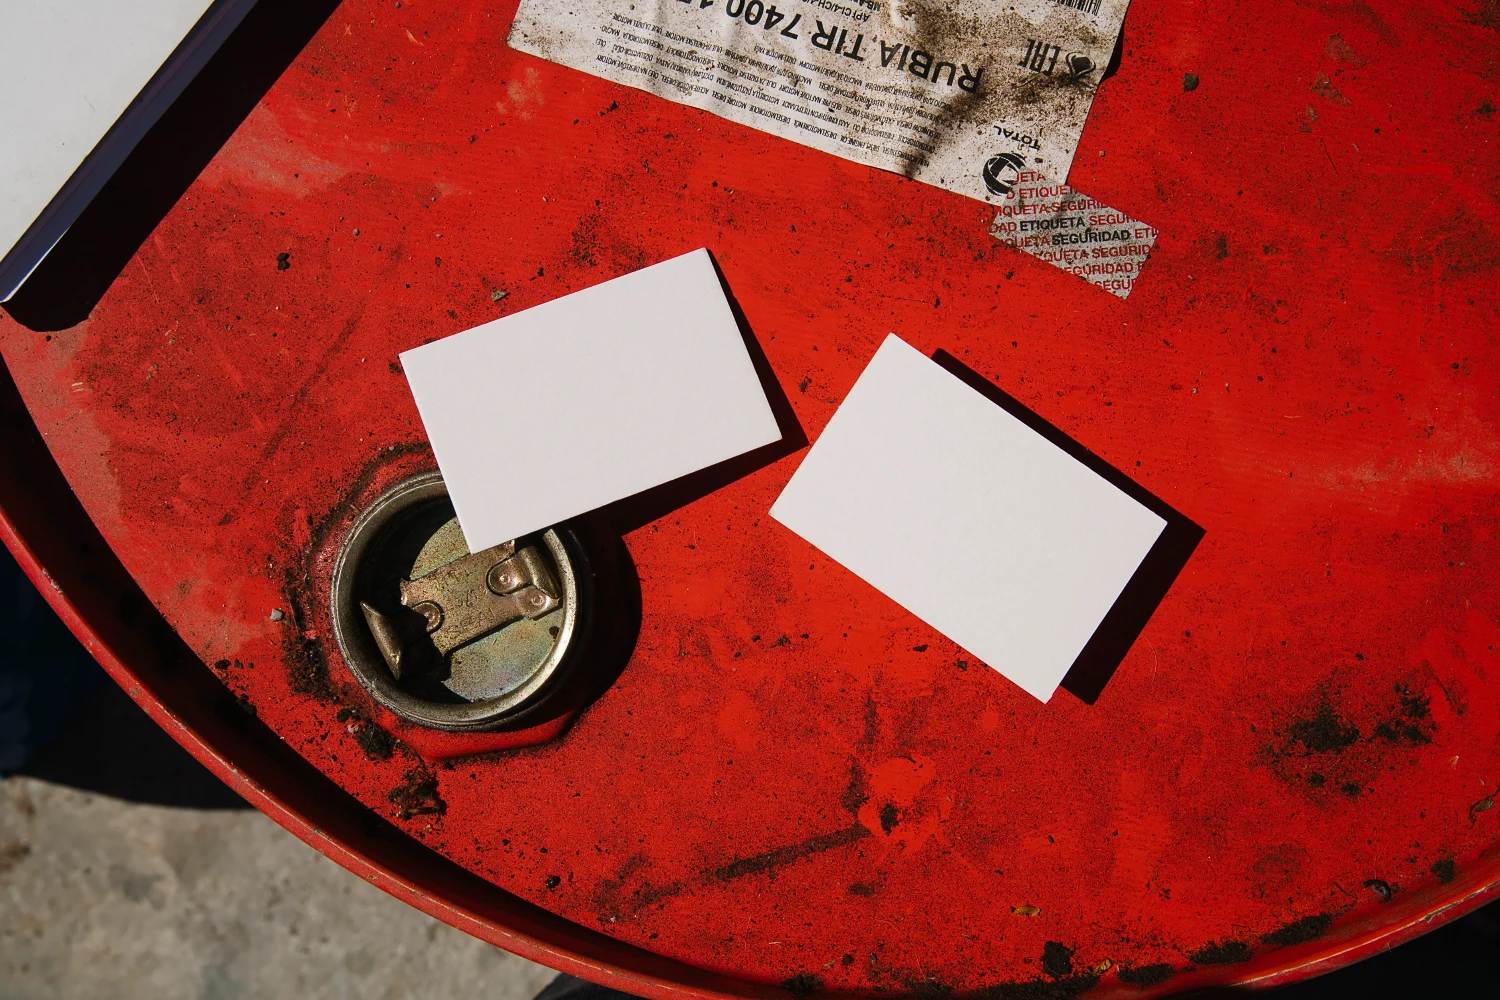 Two creative business card mockups on a rusty barrel.